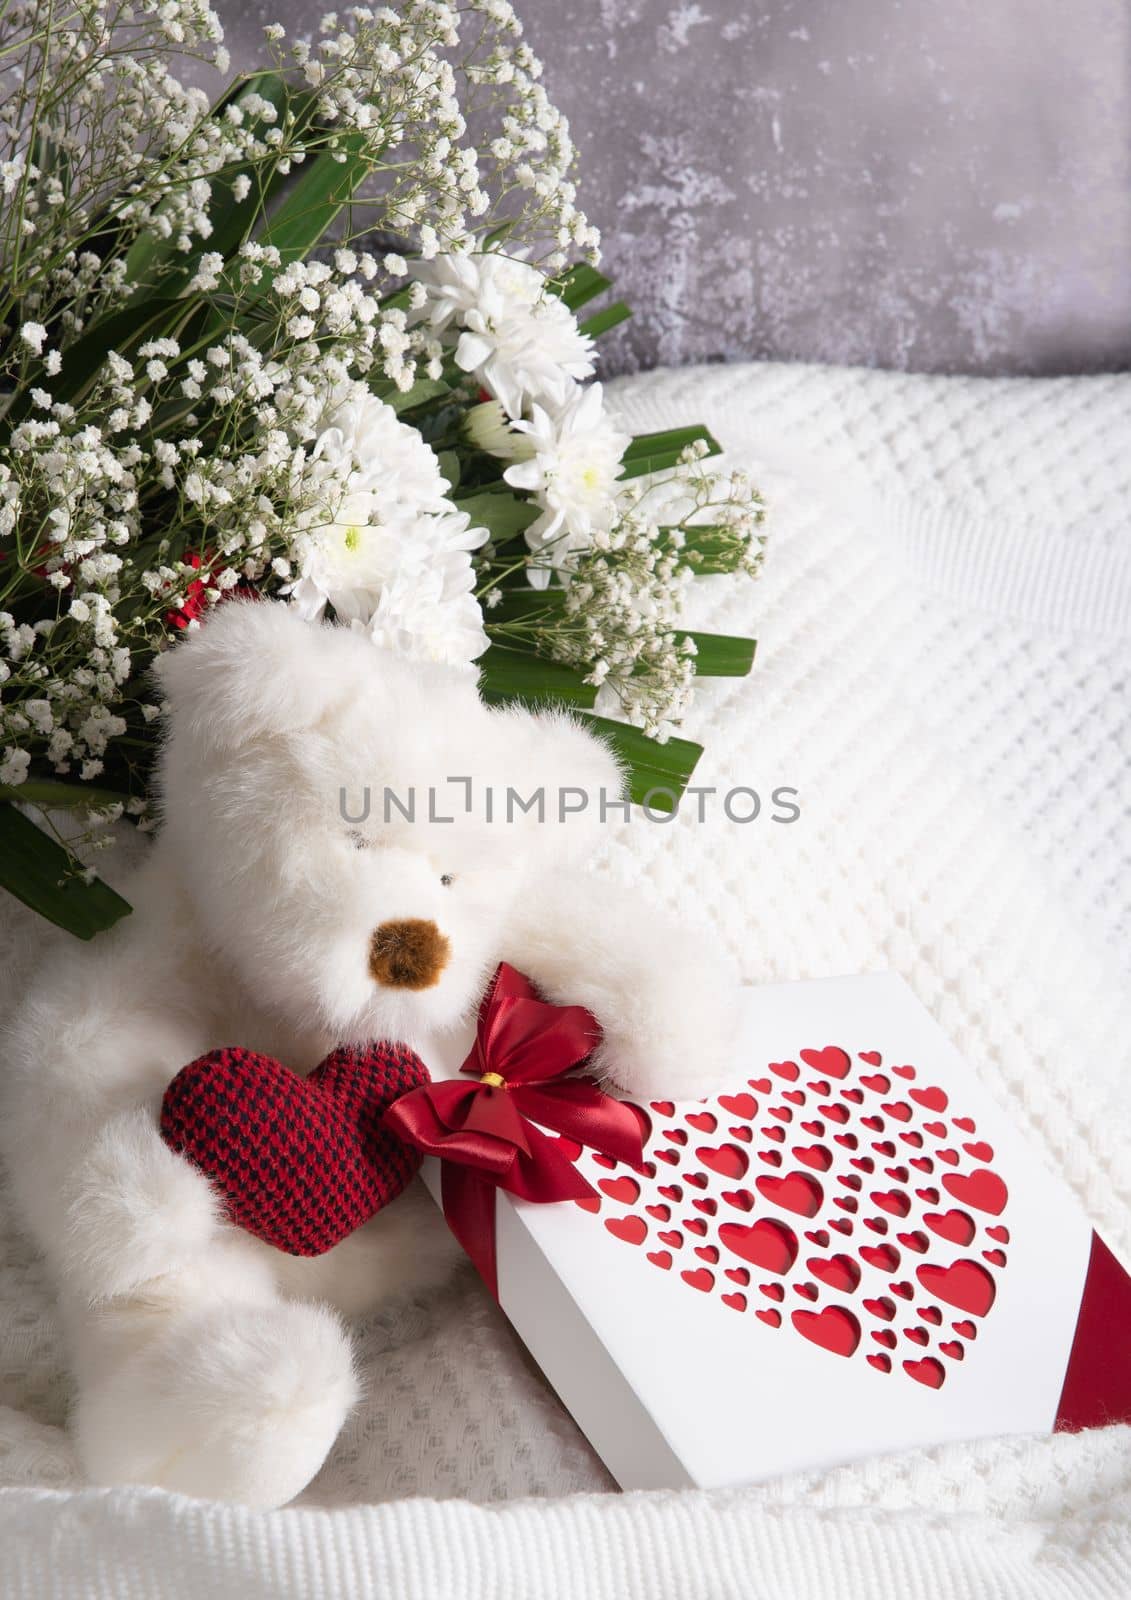 Valentine's day gift, teddy bear with a heart, a box of pralines and a bouquet of flowers on the bed early in the morning. High quality photo